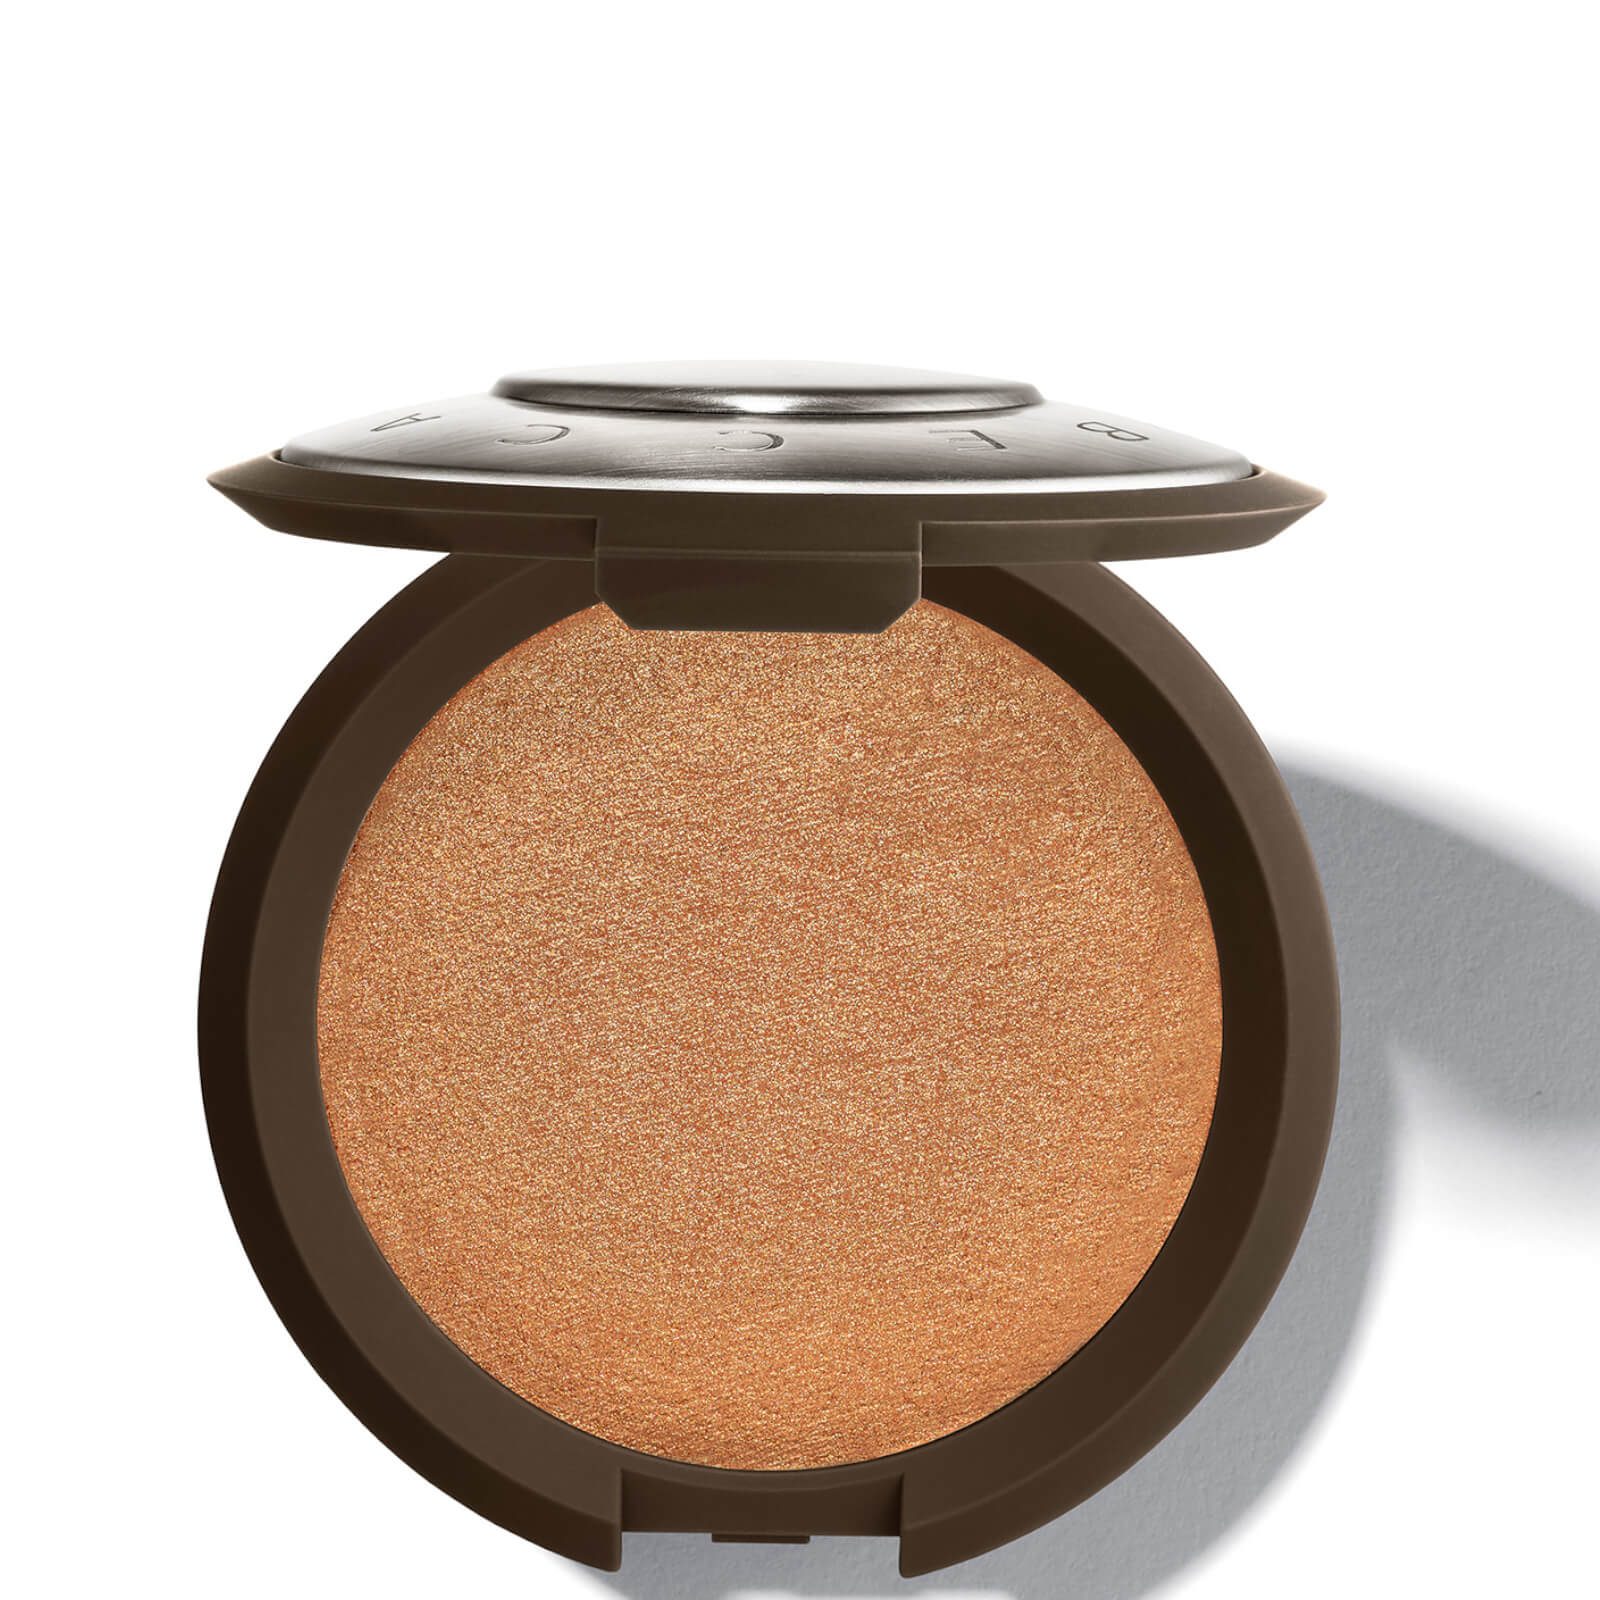 Smashbox BECCA Shimmering Skin Perfector 7g (Various Shades) - Chocolate Geode